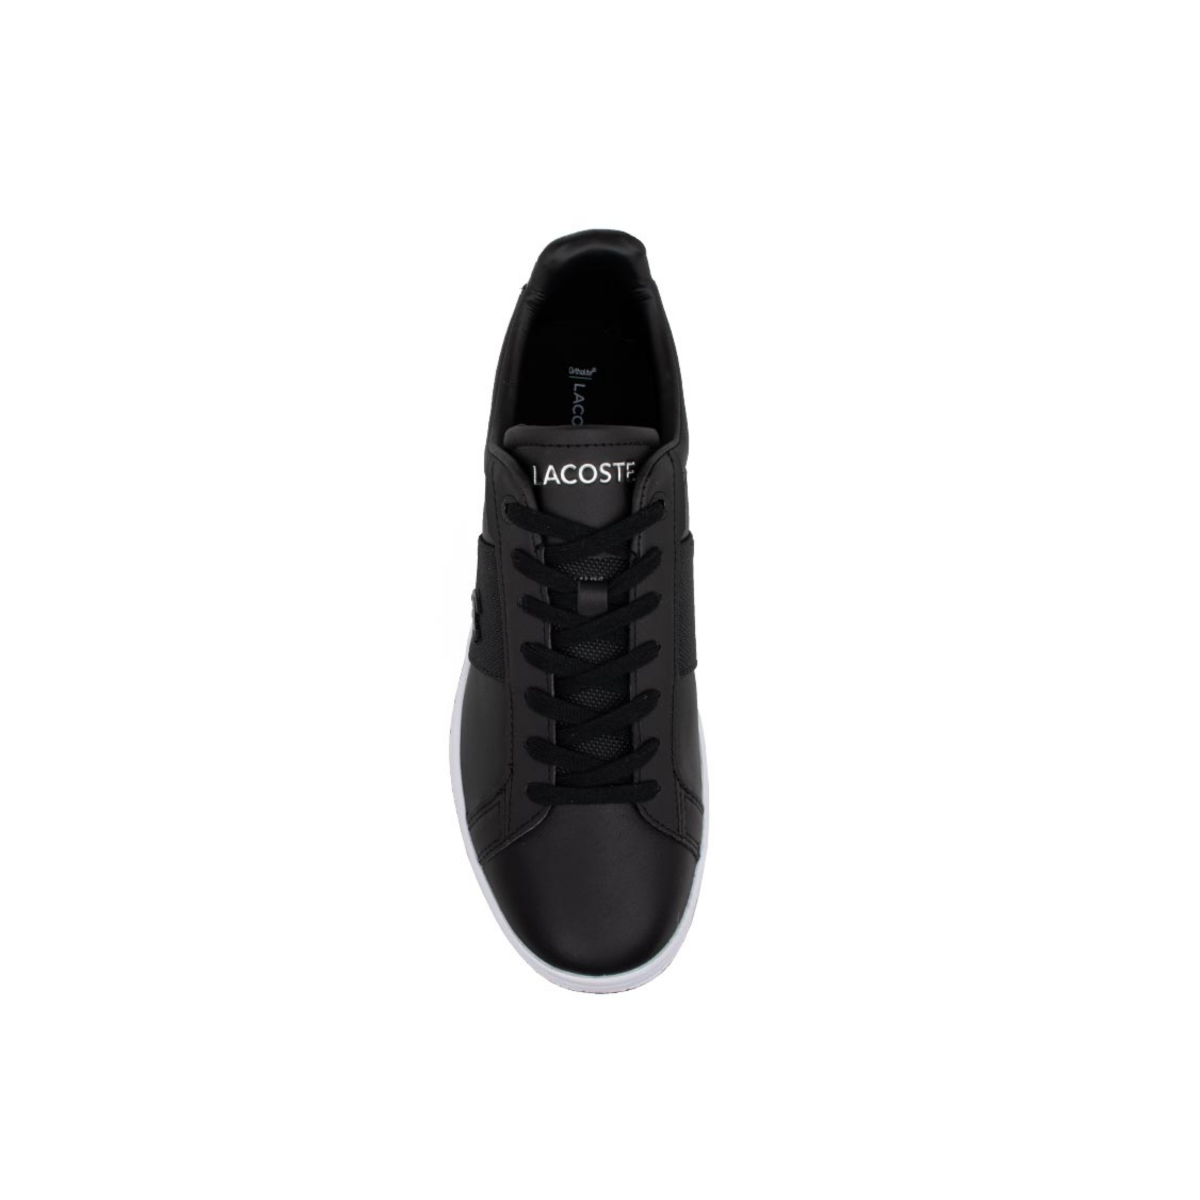 LACOSTE 7-45SMA0046312 CARNABY PRO GGR MN'S (Medium) Black/White Leather & Synthetic Lifestyle Shoes